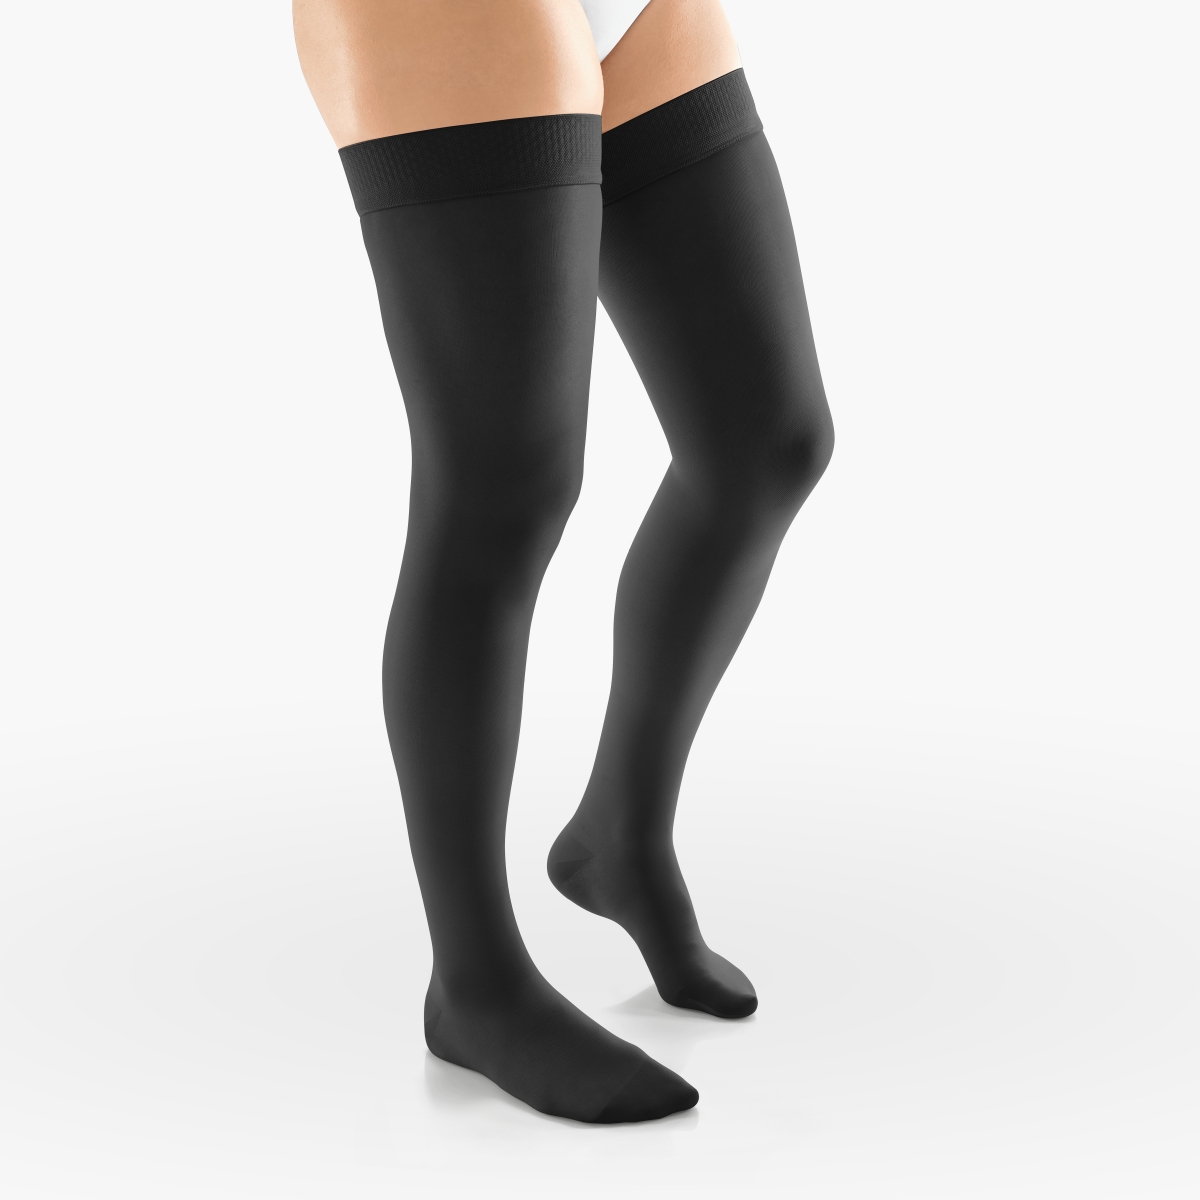 Venosan Elastic Stockings Class 1 Compression Knee without Toecap SweetCare  United States